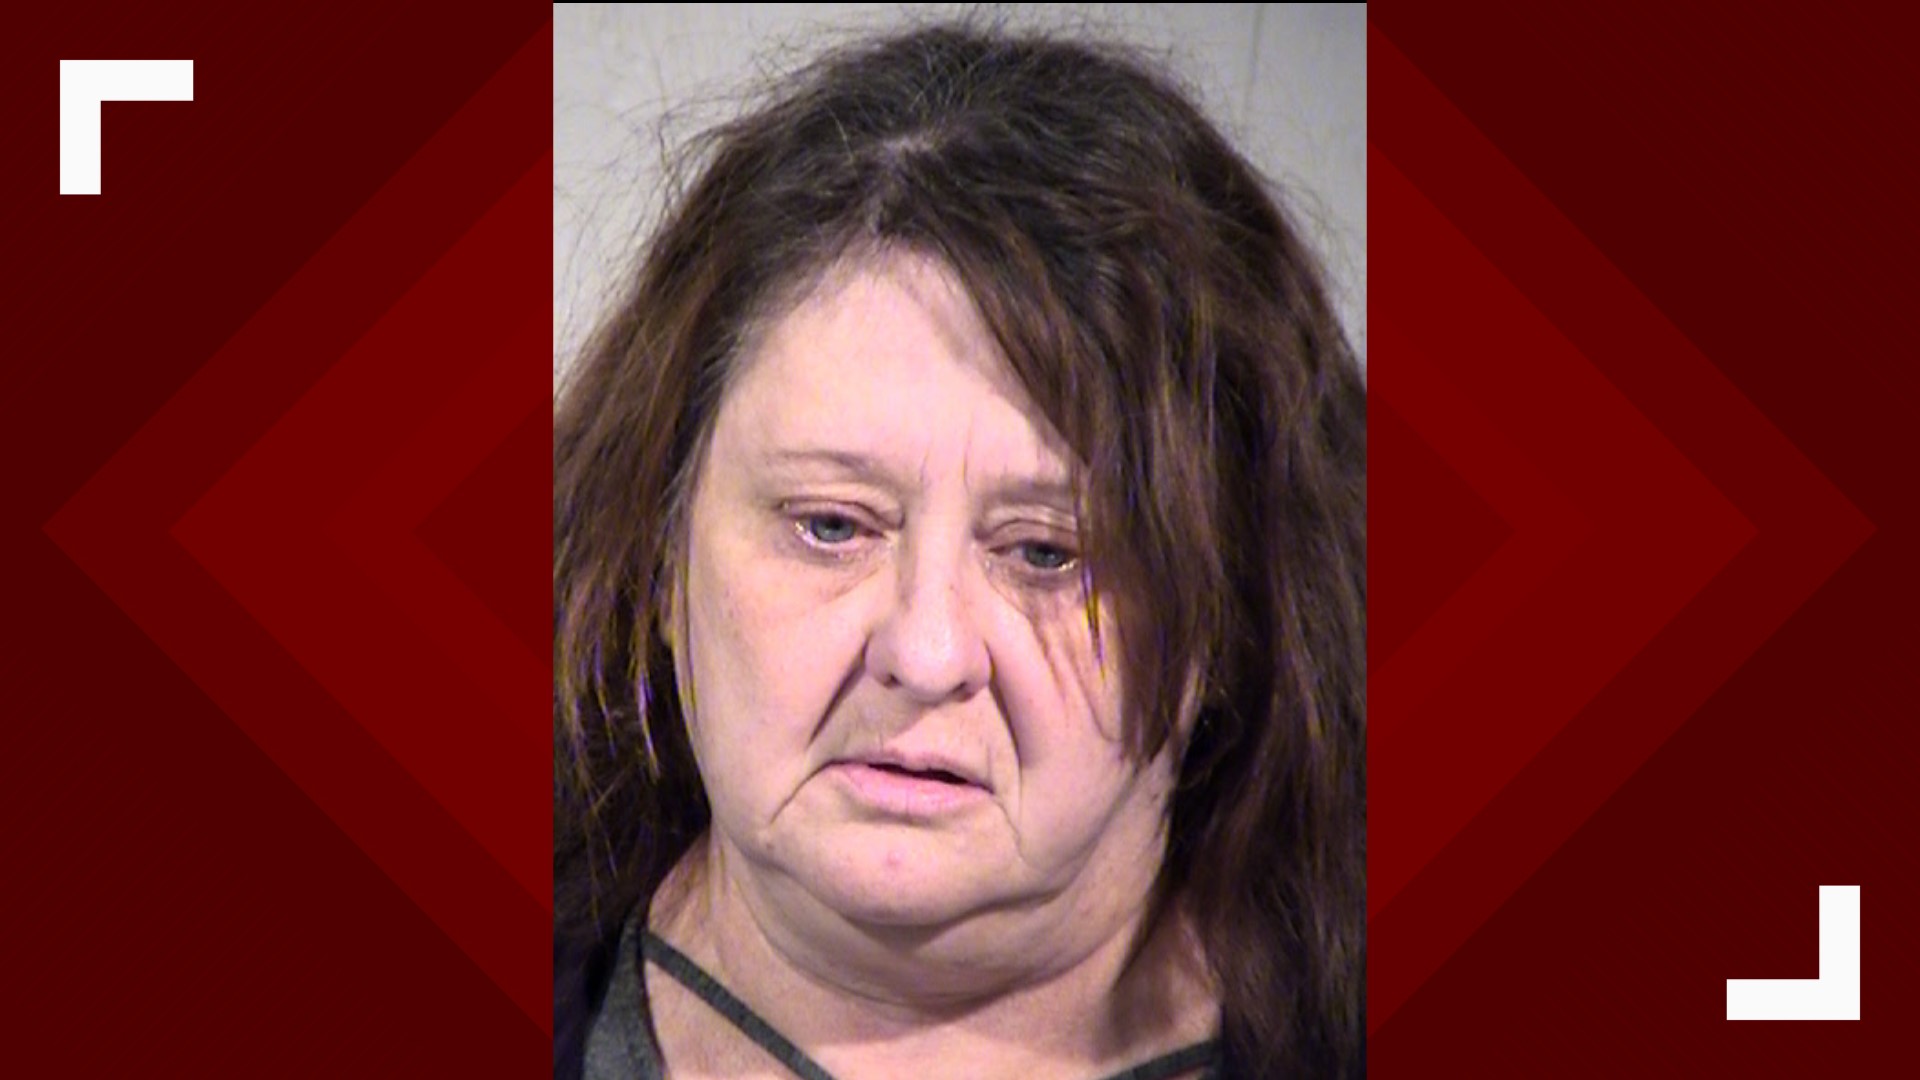 Half a dozen dead dogs and skeletal remains were found inside the home of a Mesa woman. Theresa Deanne Finneren was booked on 30 counts of animal cruelty.